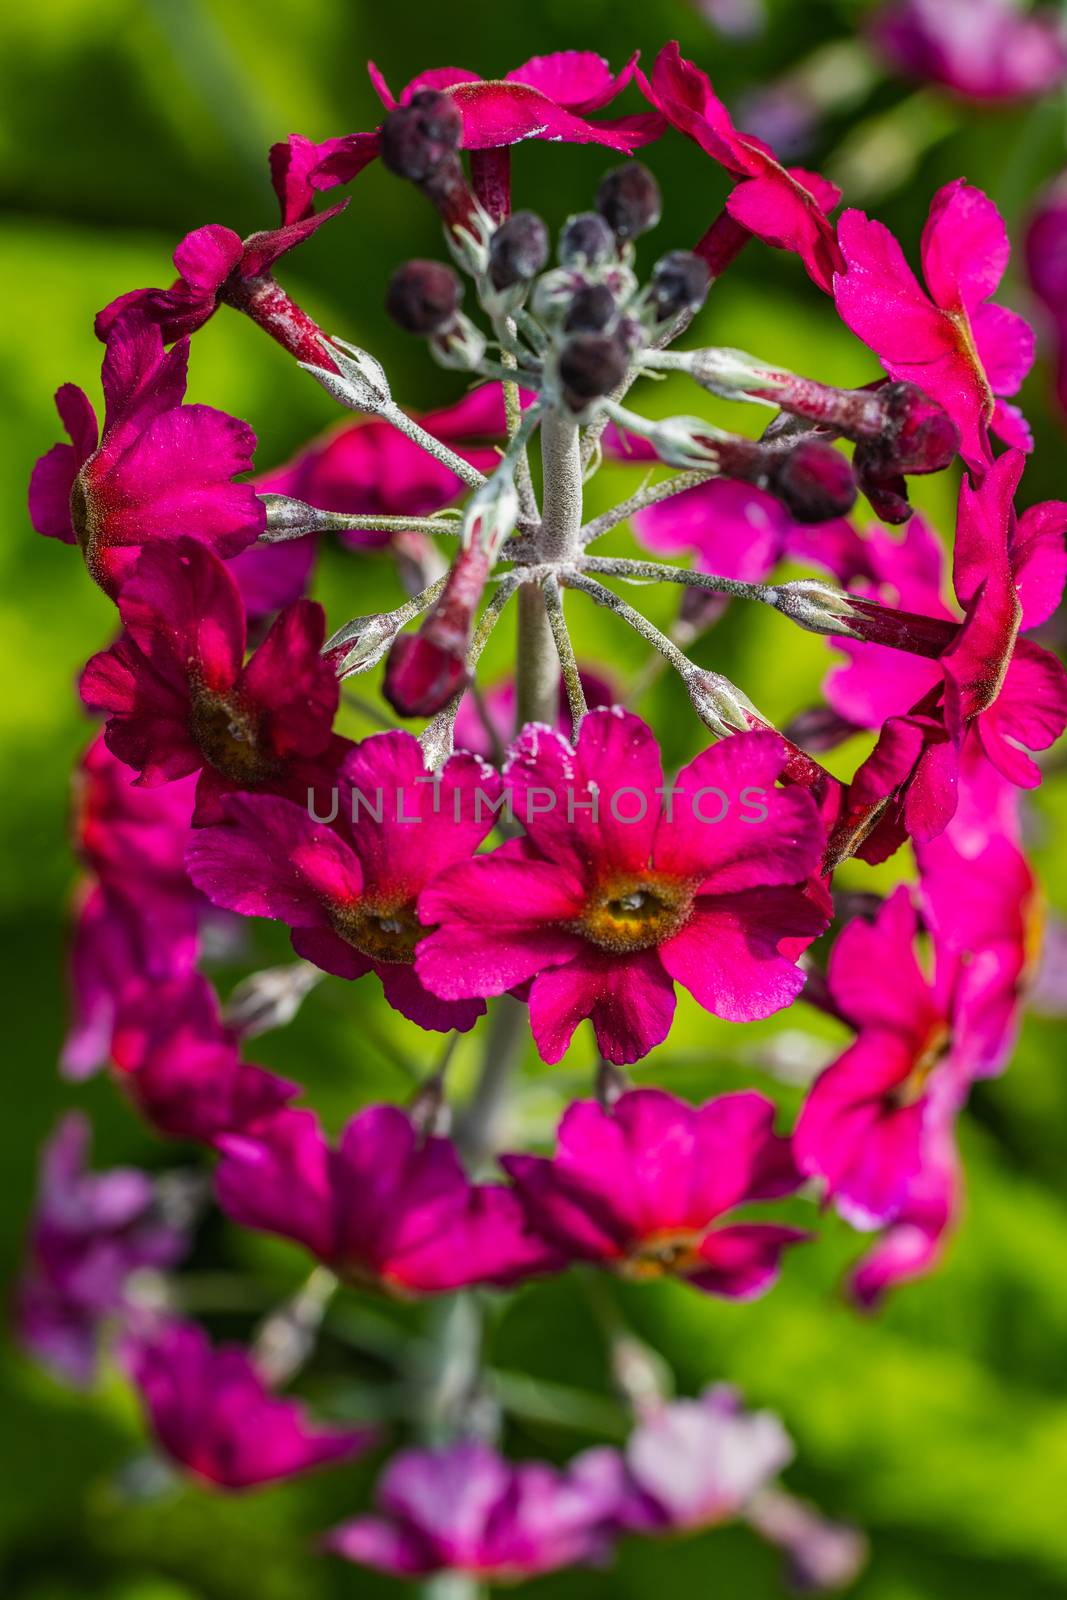 A close up of some pink magenta flowers